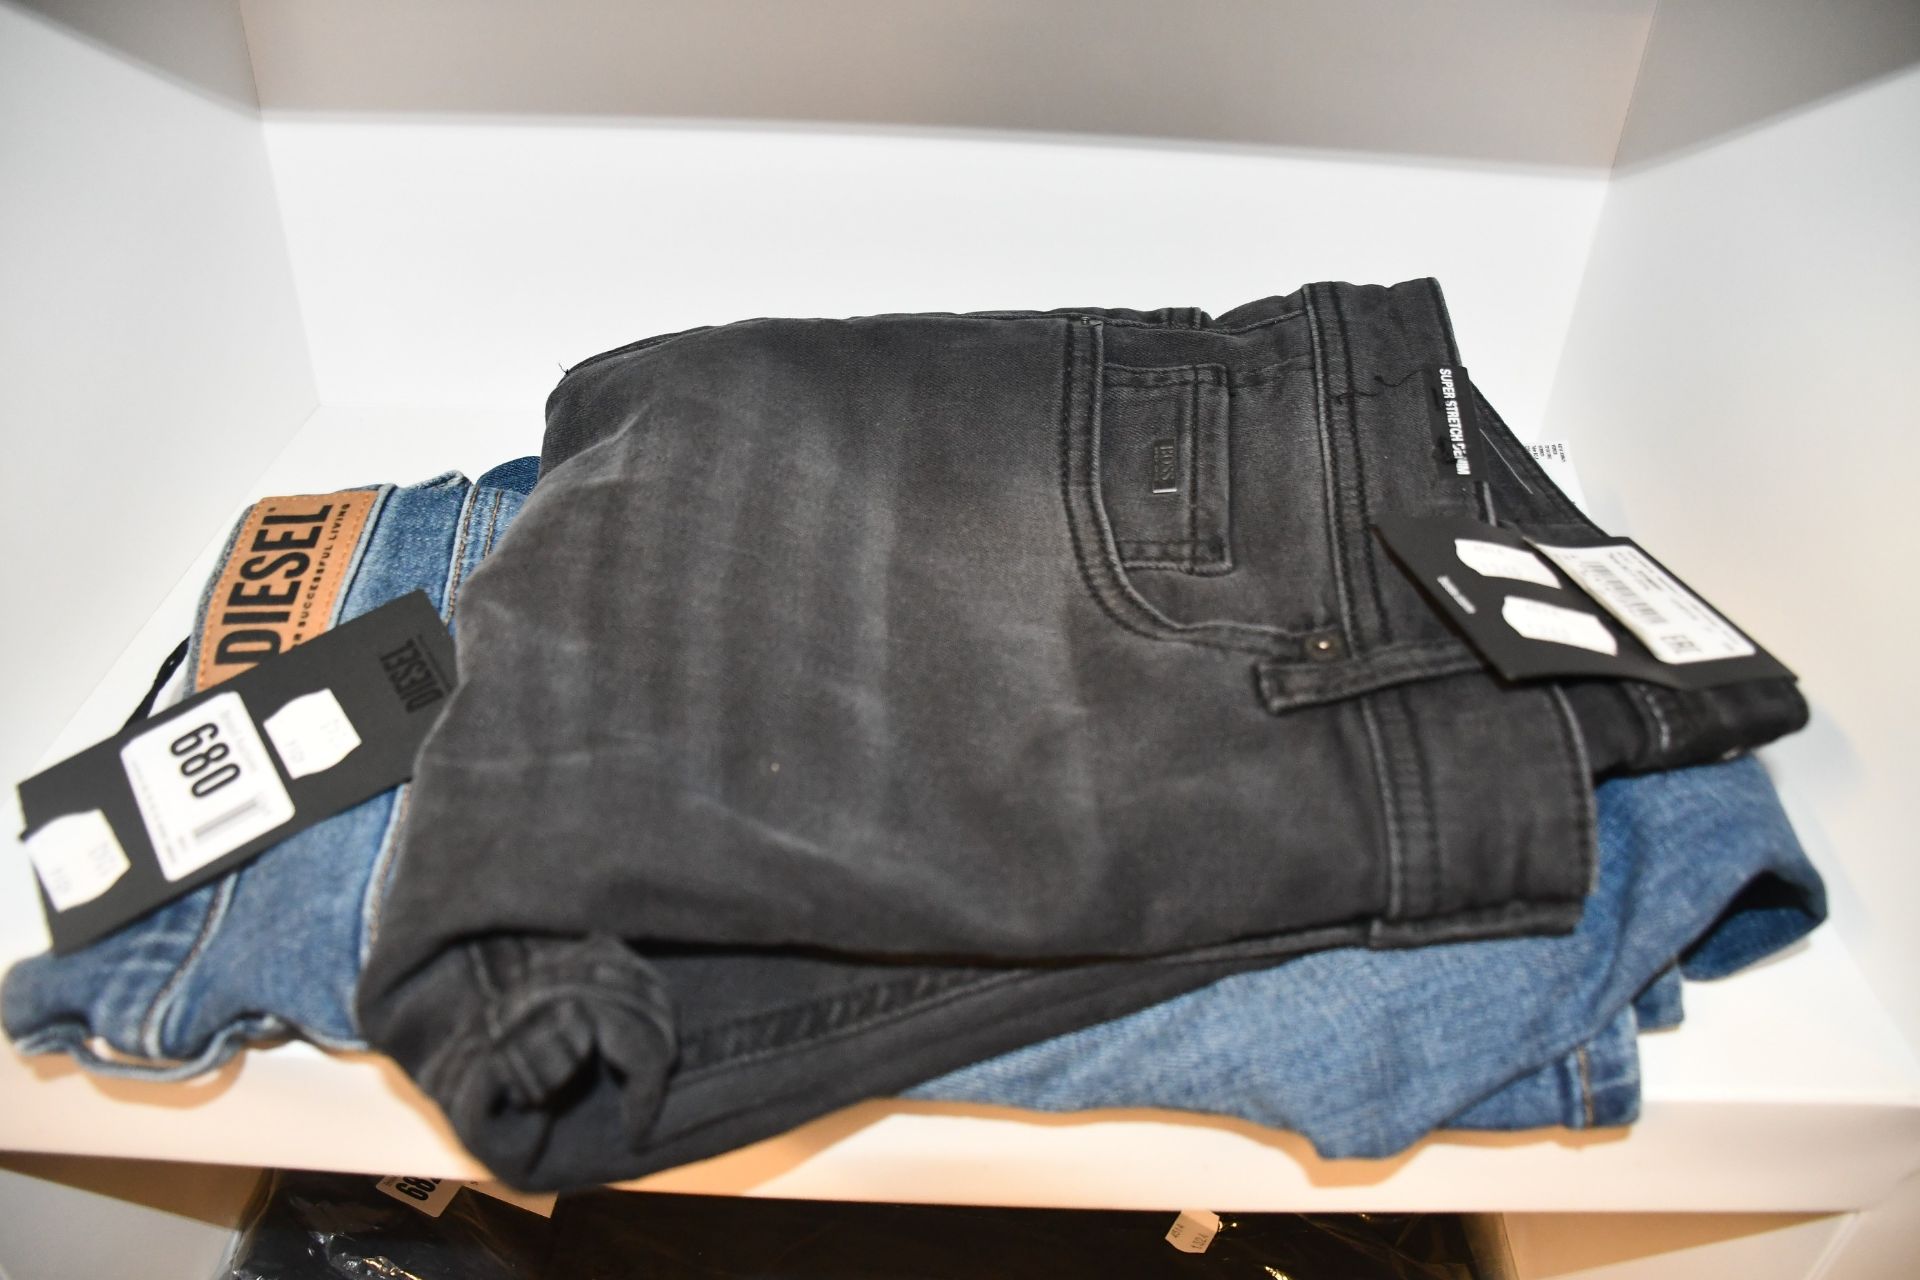 A pair of as new Hugo Boss jeans (W35/L34) and a pair of Diesel jeans (W25/L32).